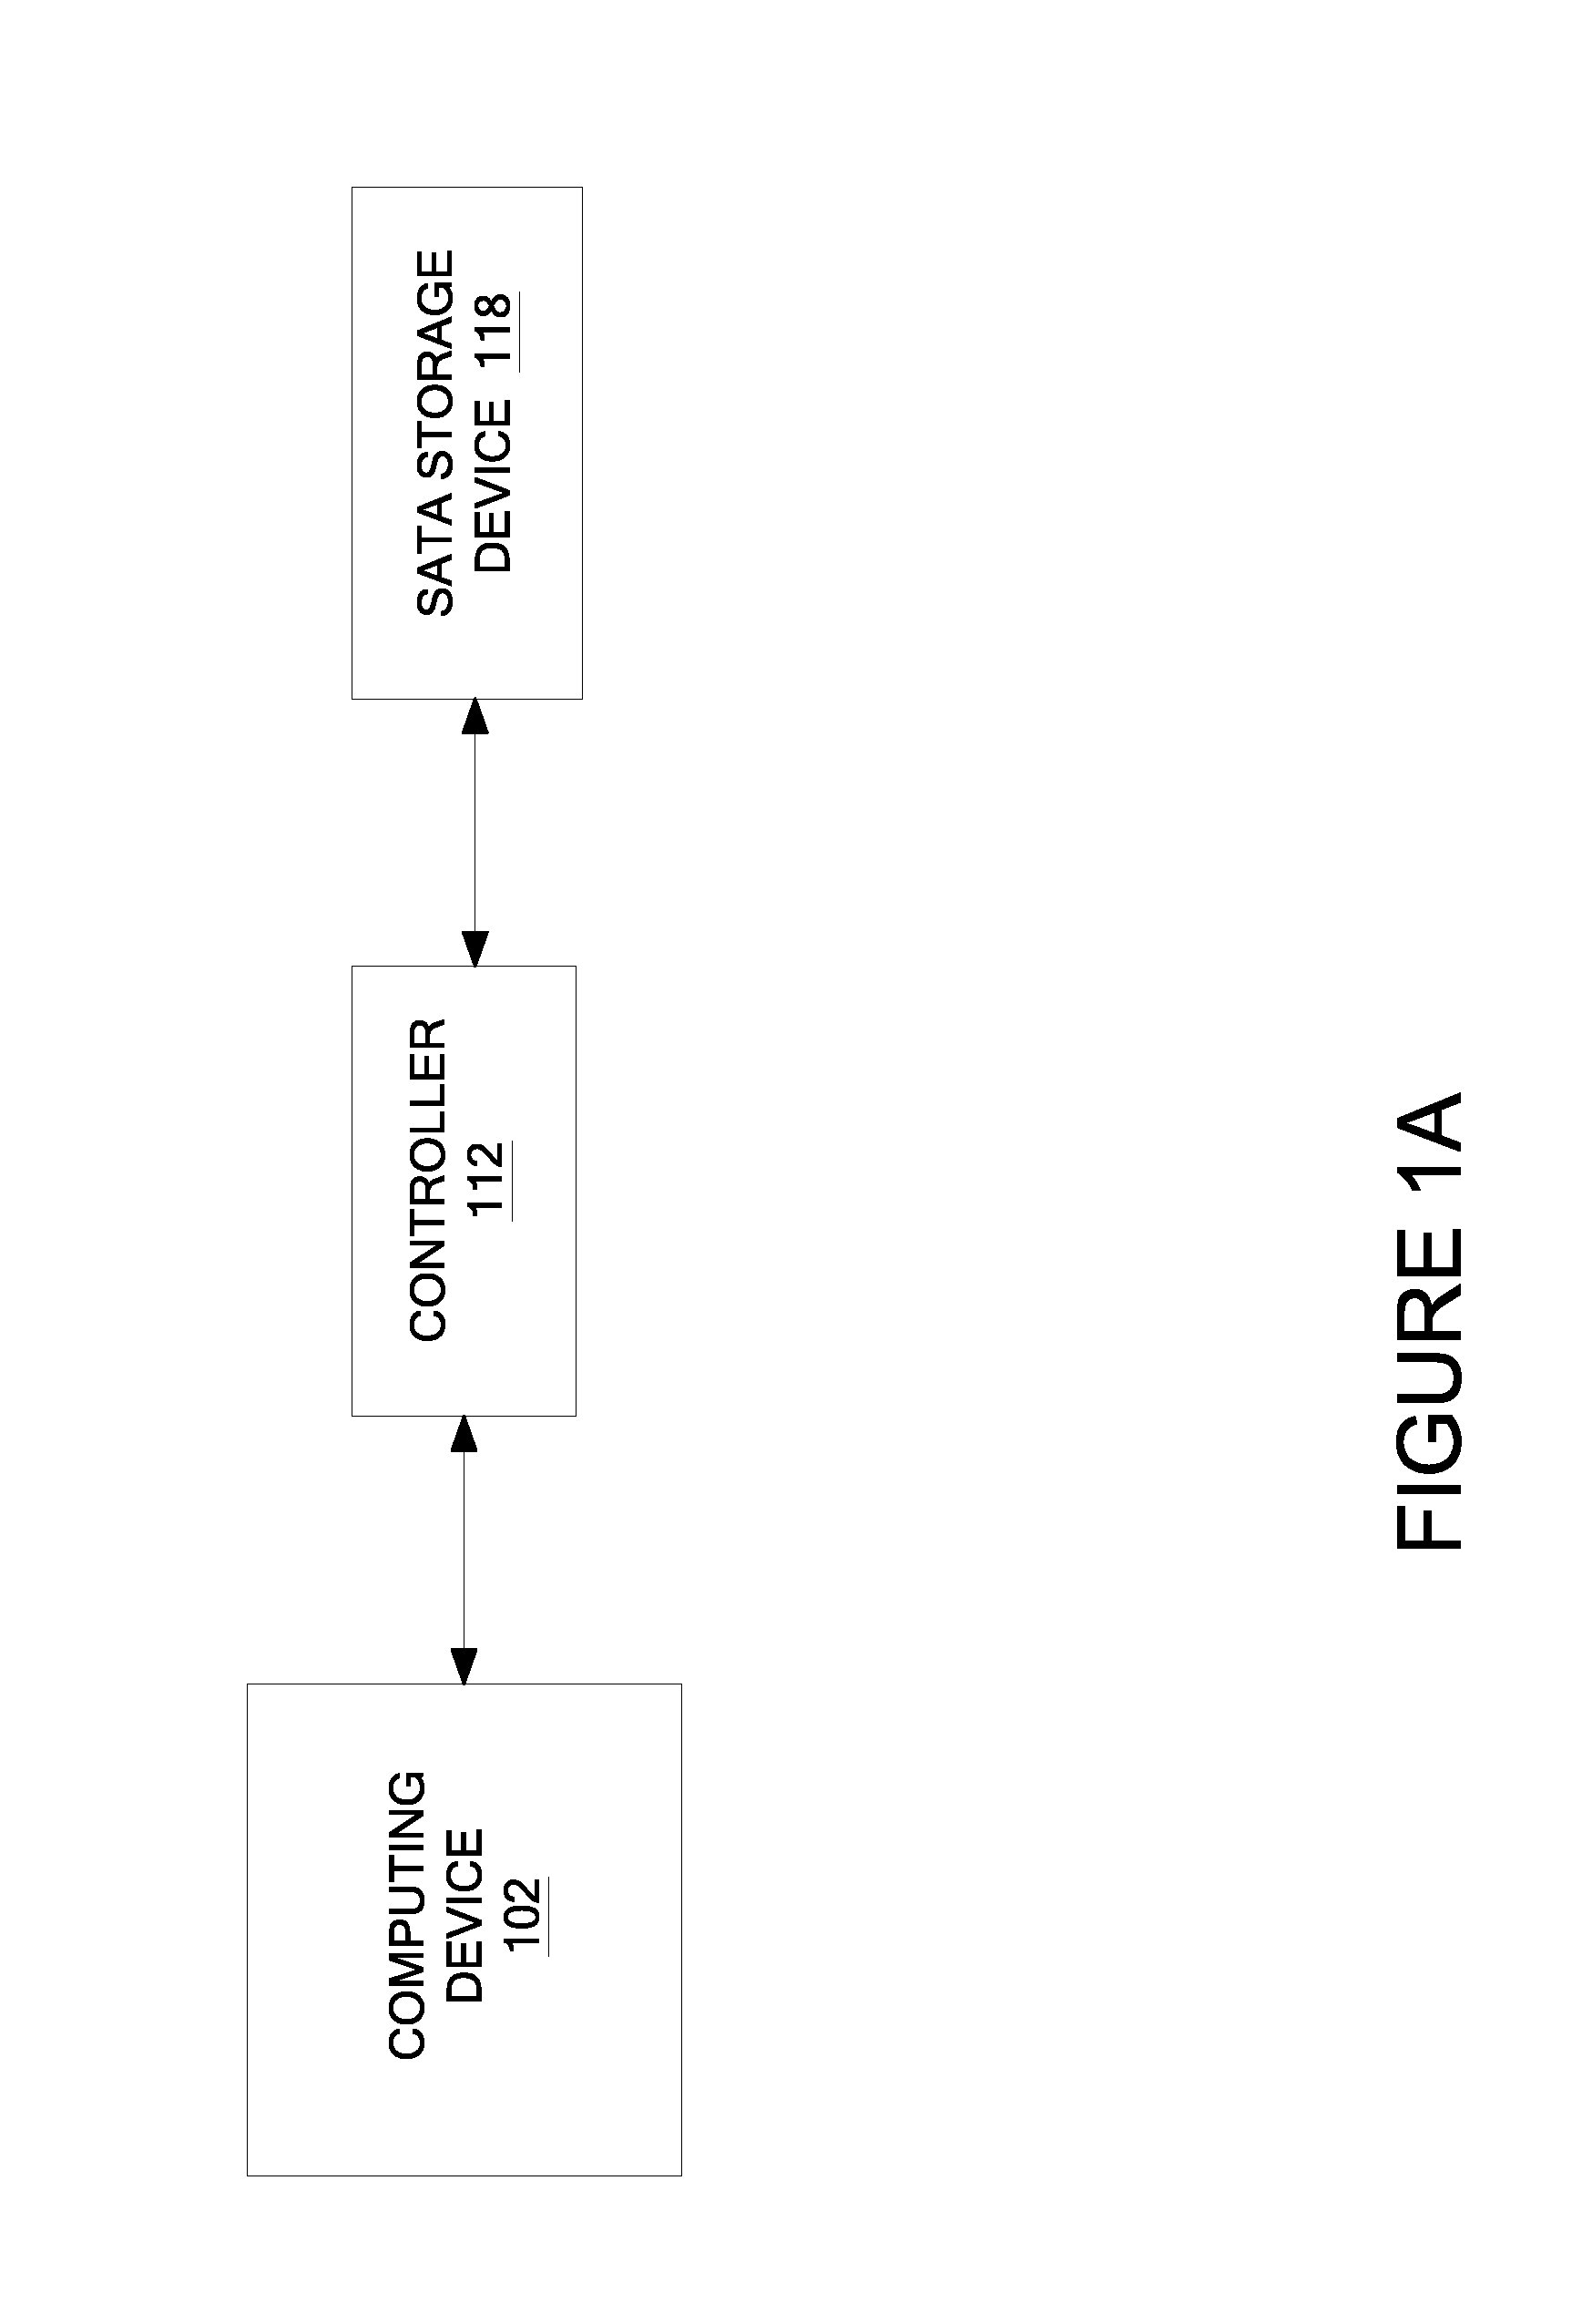 System and Method of Providing Security to an External Attachment Device